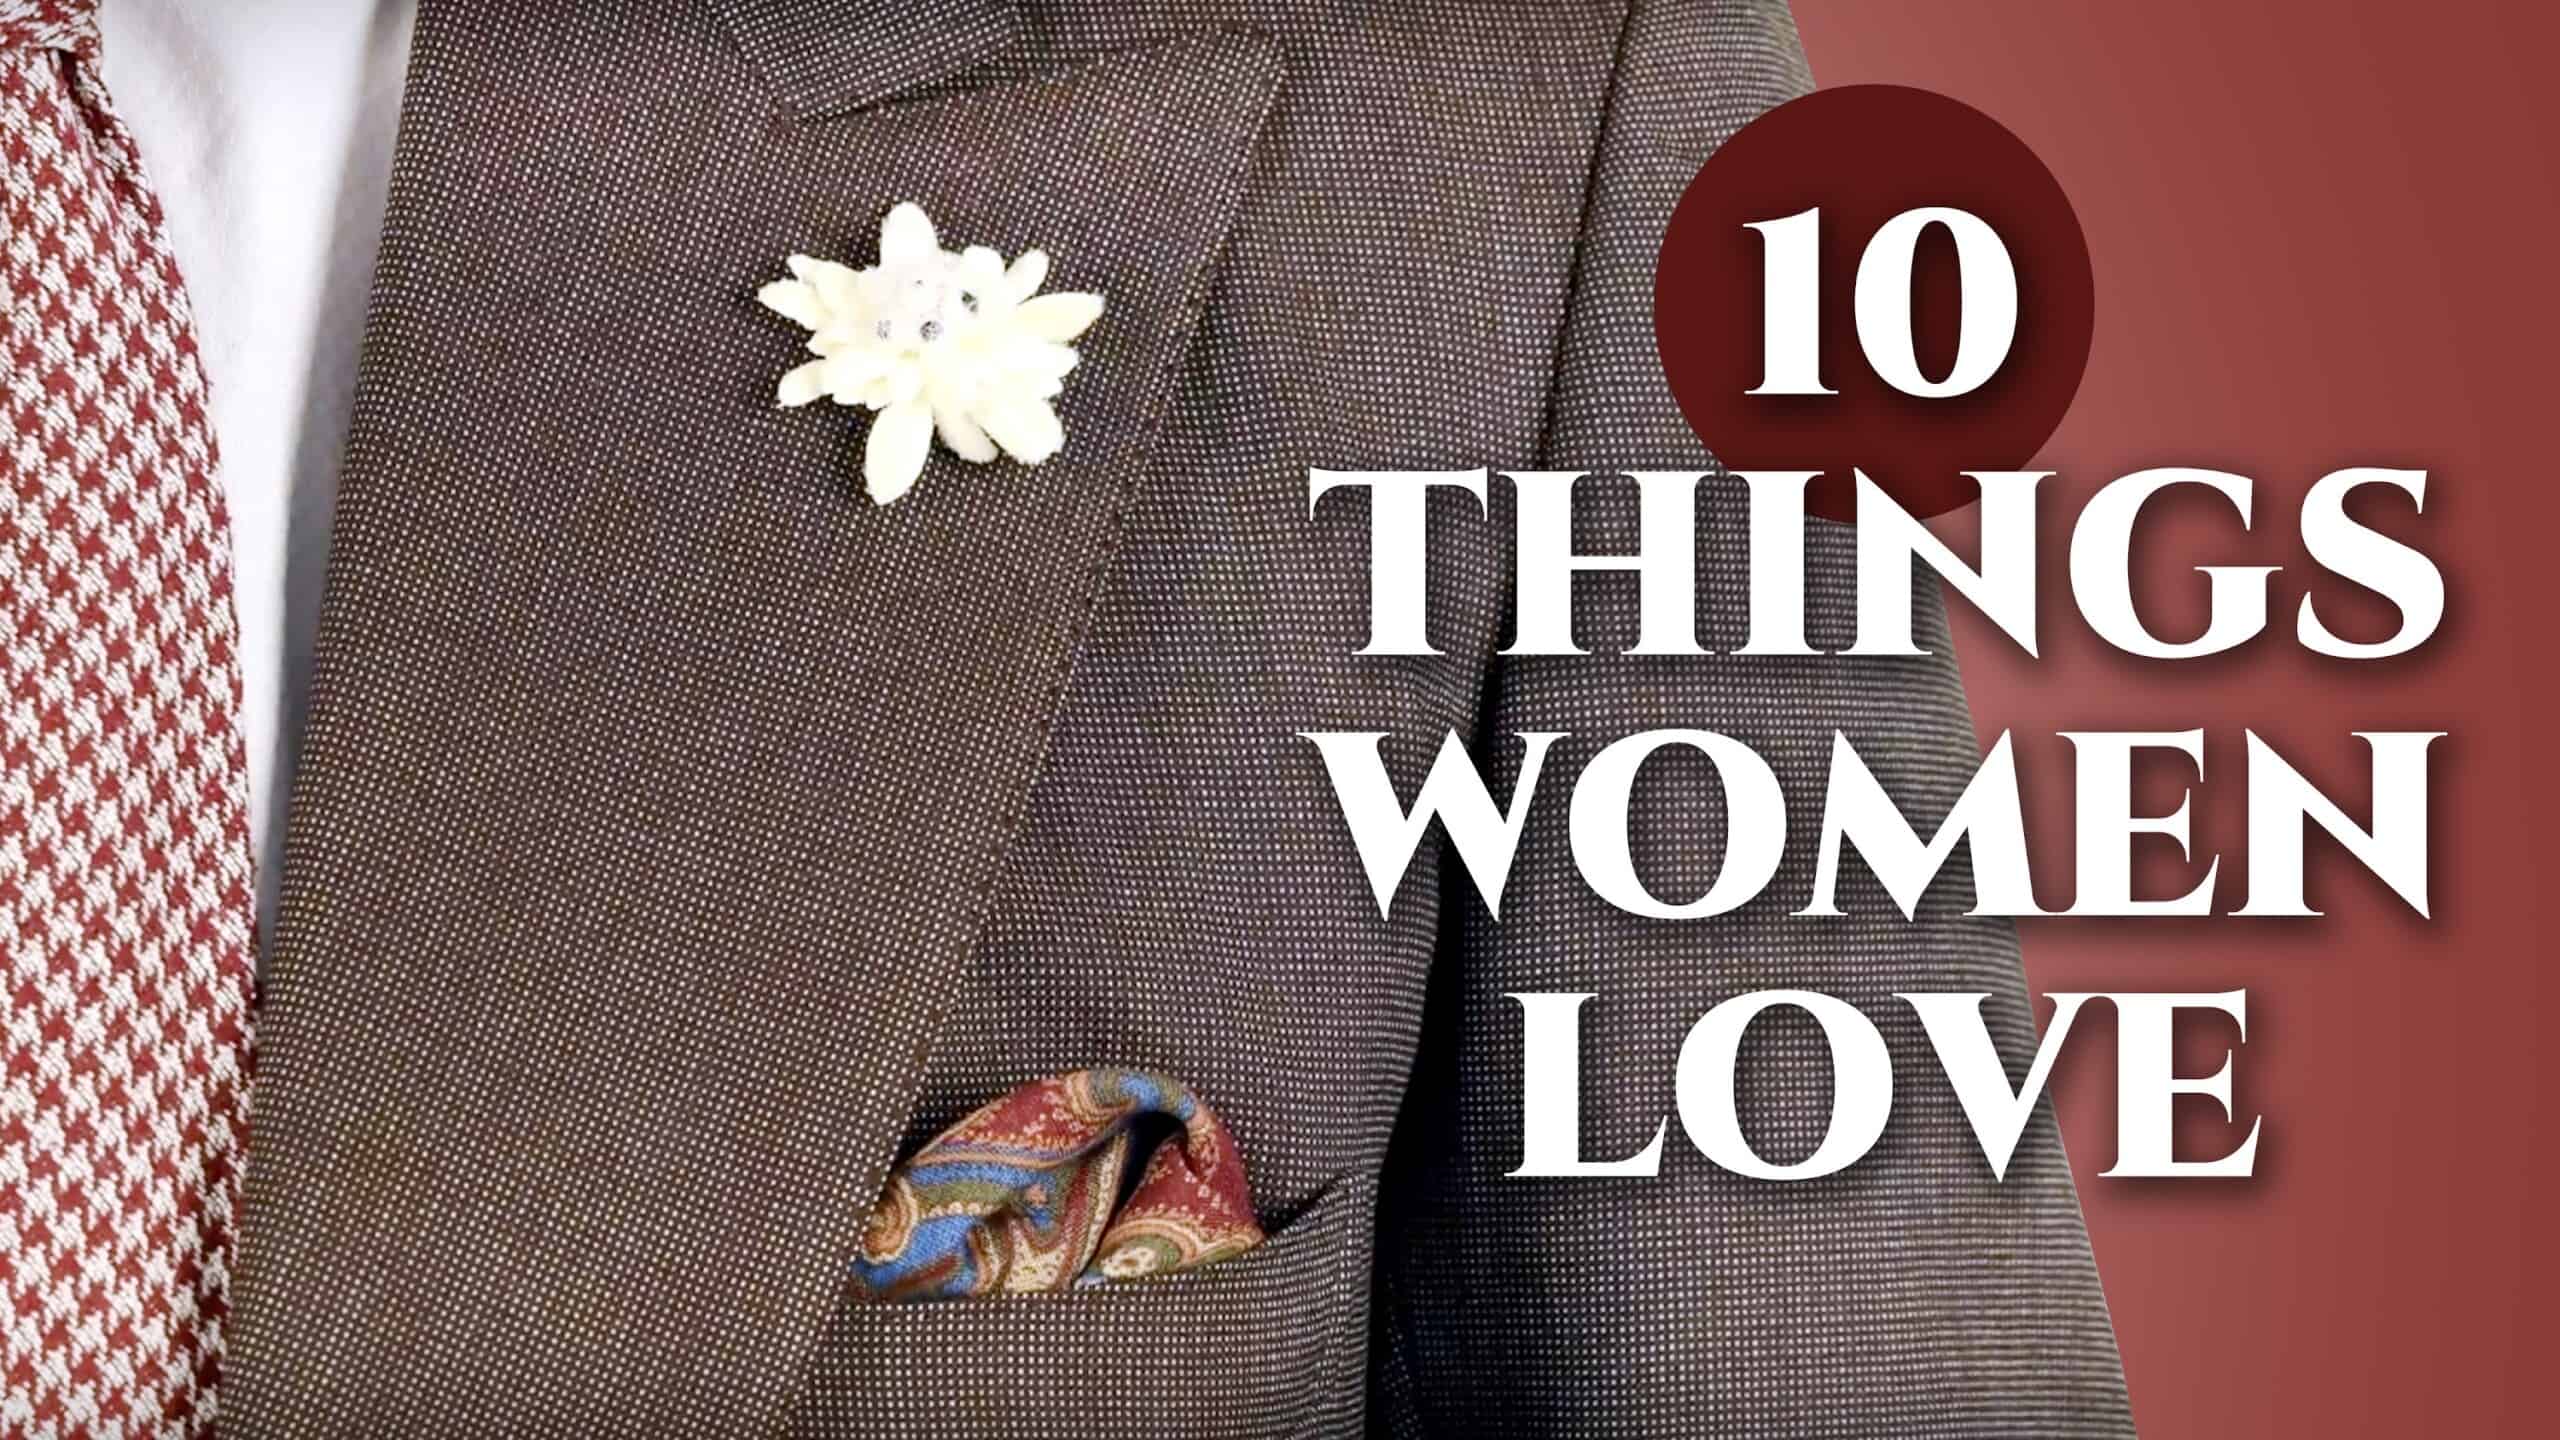 10 things women love scaled